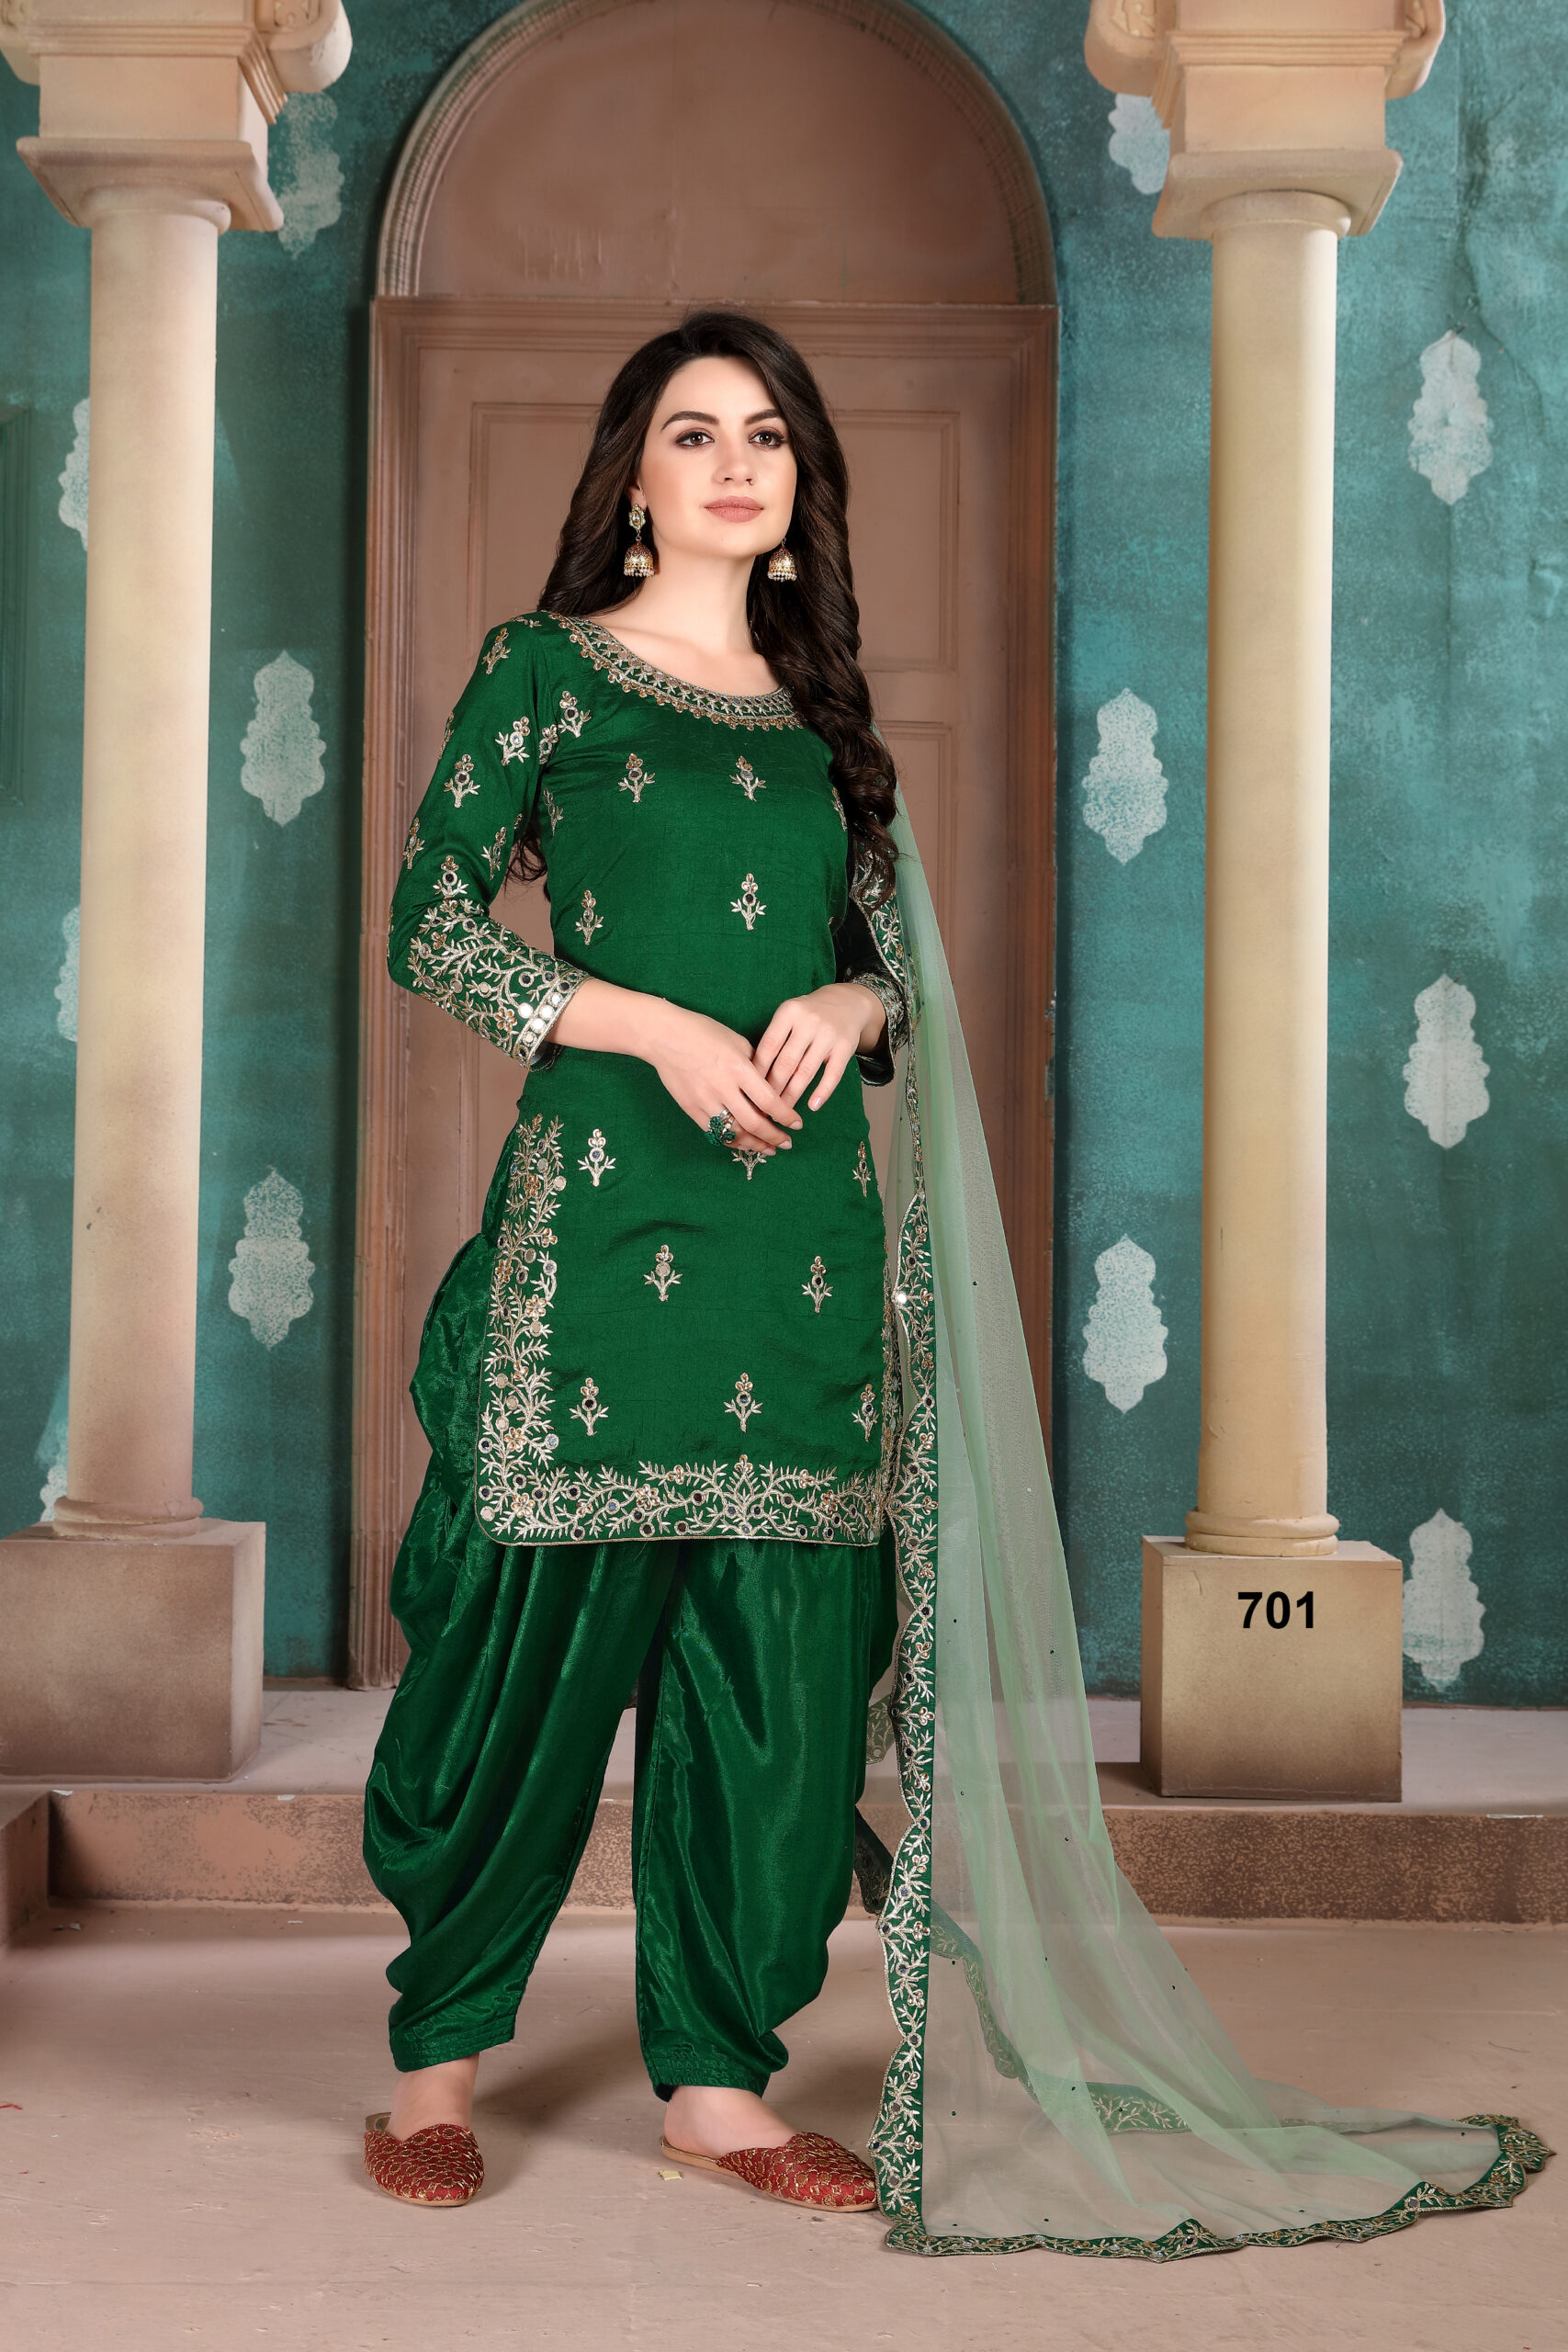 Womens Suit  Suits for women, Green outfits for women, Green suit